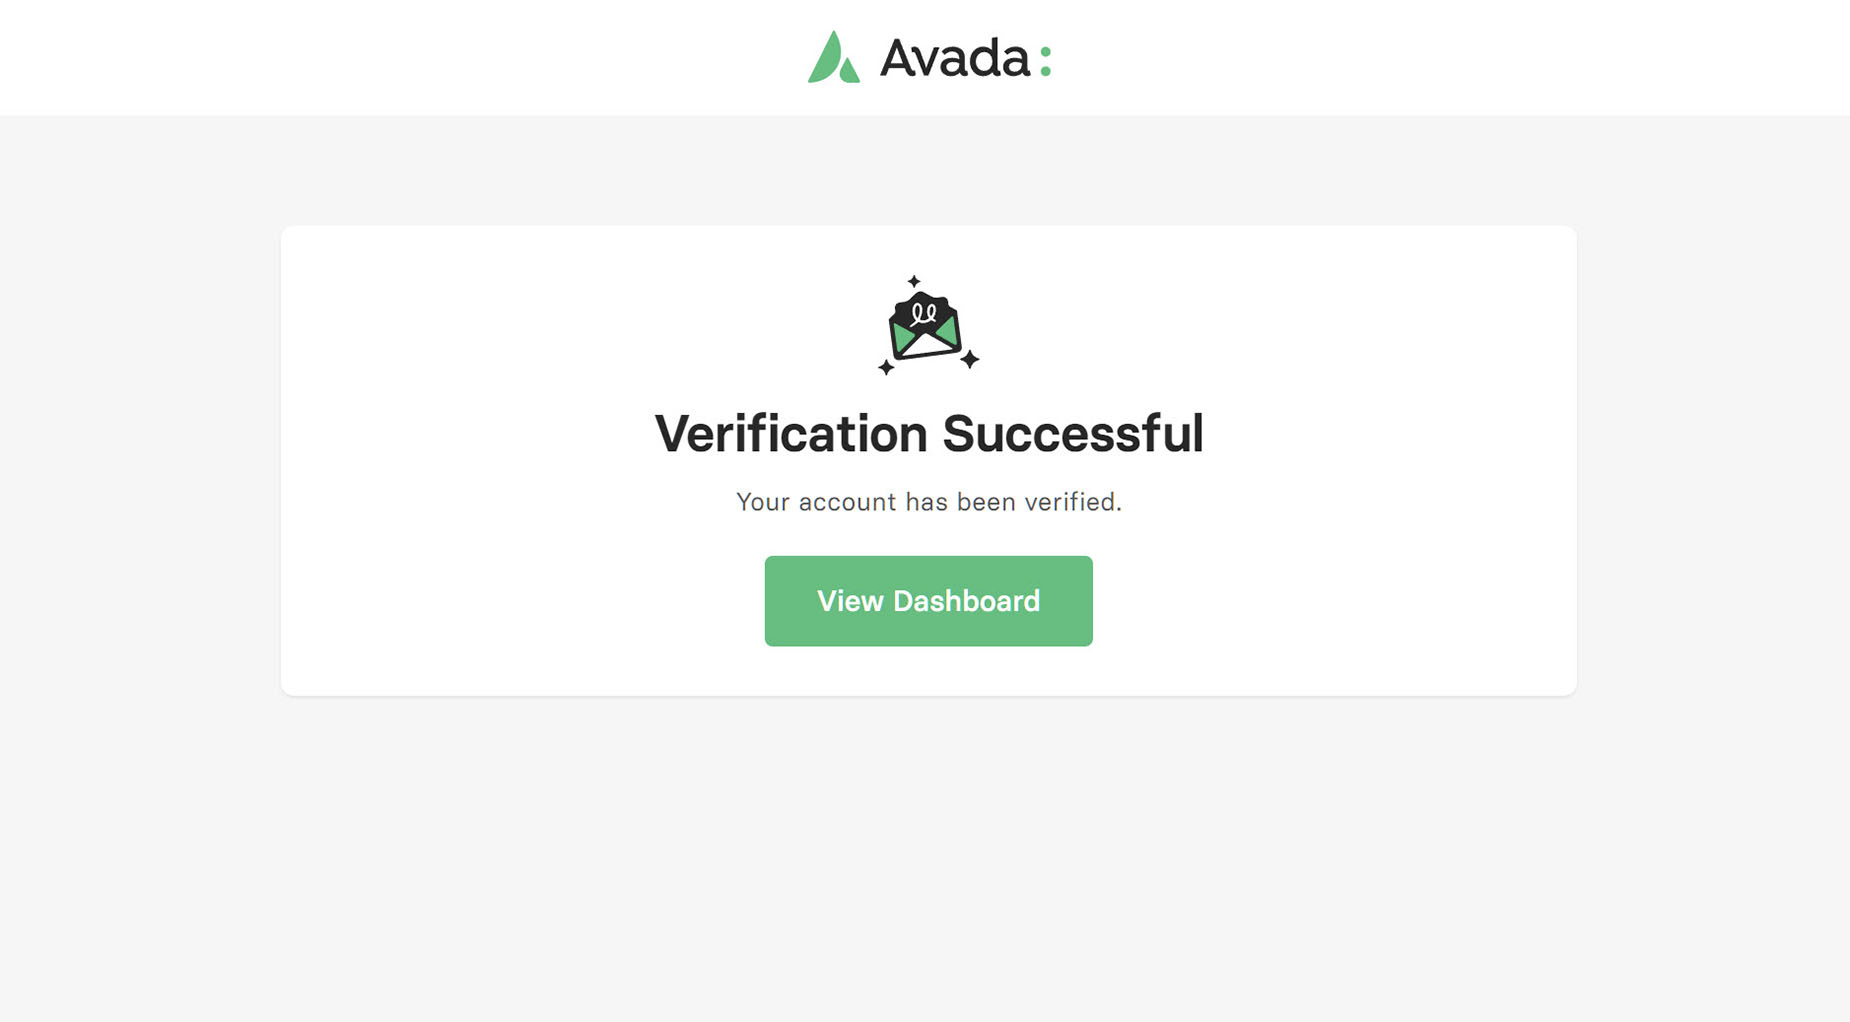 My Avada > Email Account Verification Success